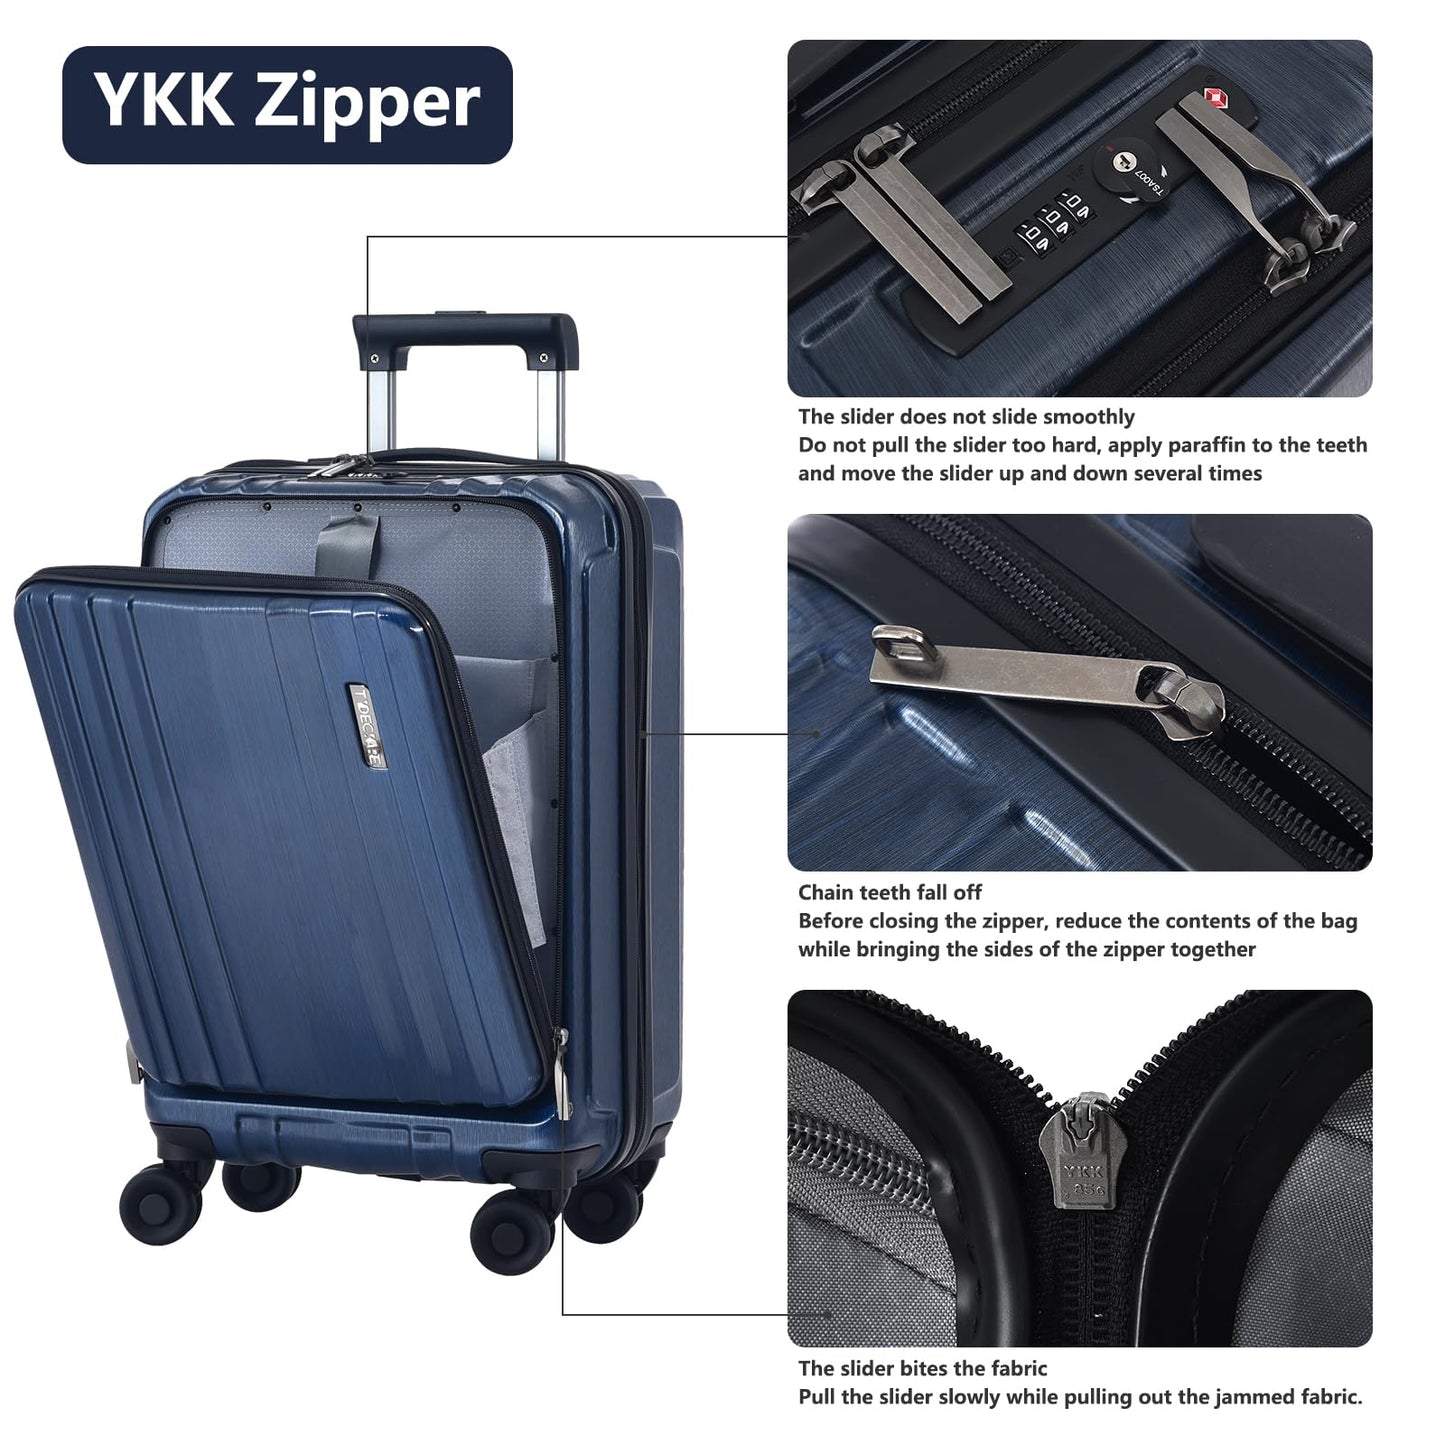 Carry On 55x35x23cm Cabin Luggage 20 Inch with Front Compartment, Lightweight ABS+PC Hardshell Suitcase with Dual Control TSA Lock, YKK Zipper, 4 Spinner Silent Wheels, Dark Blue